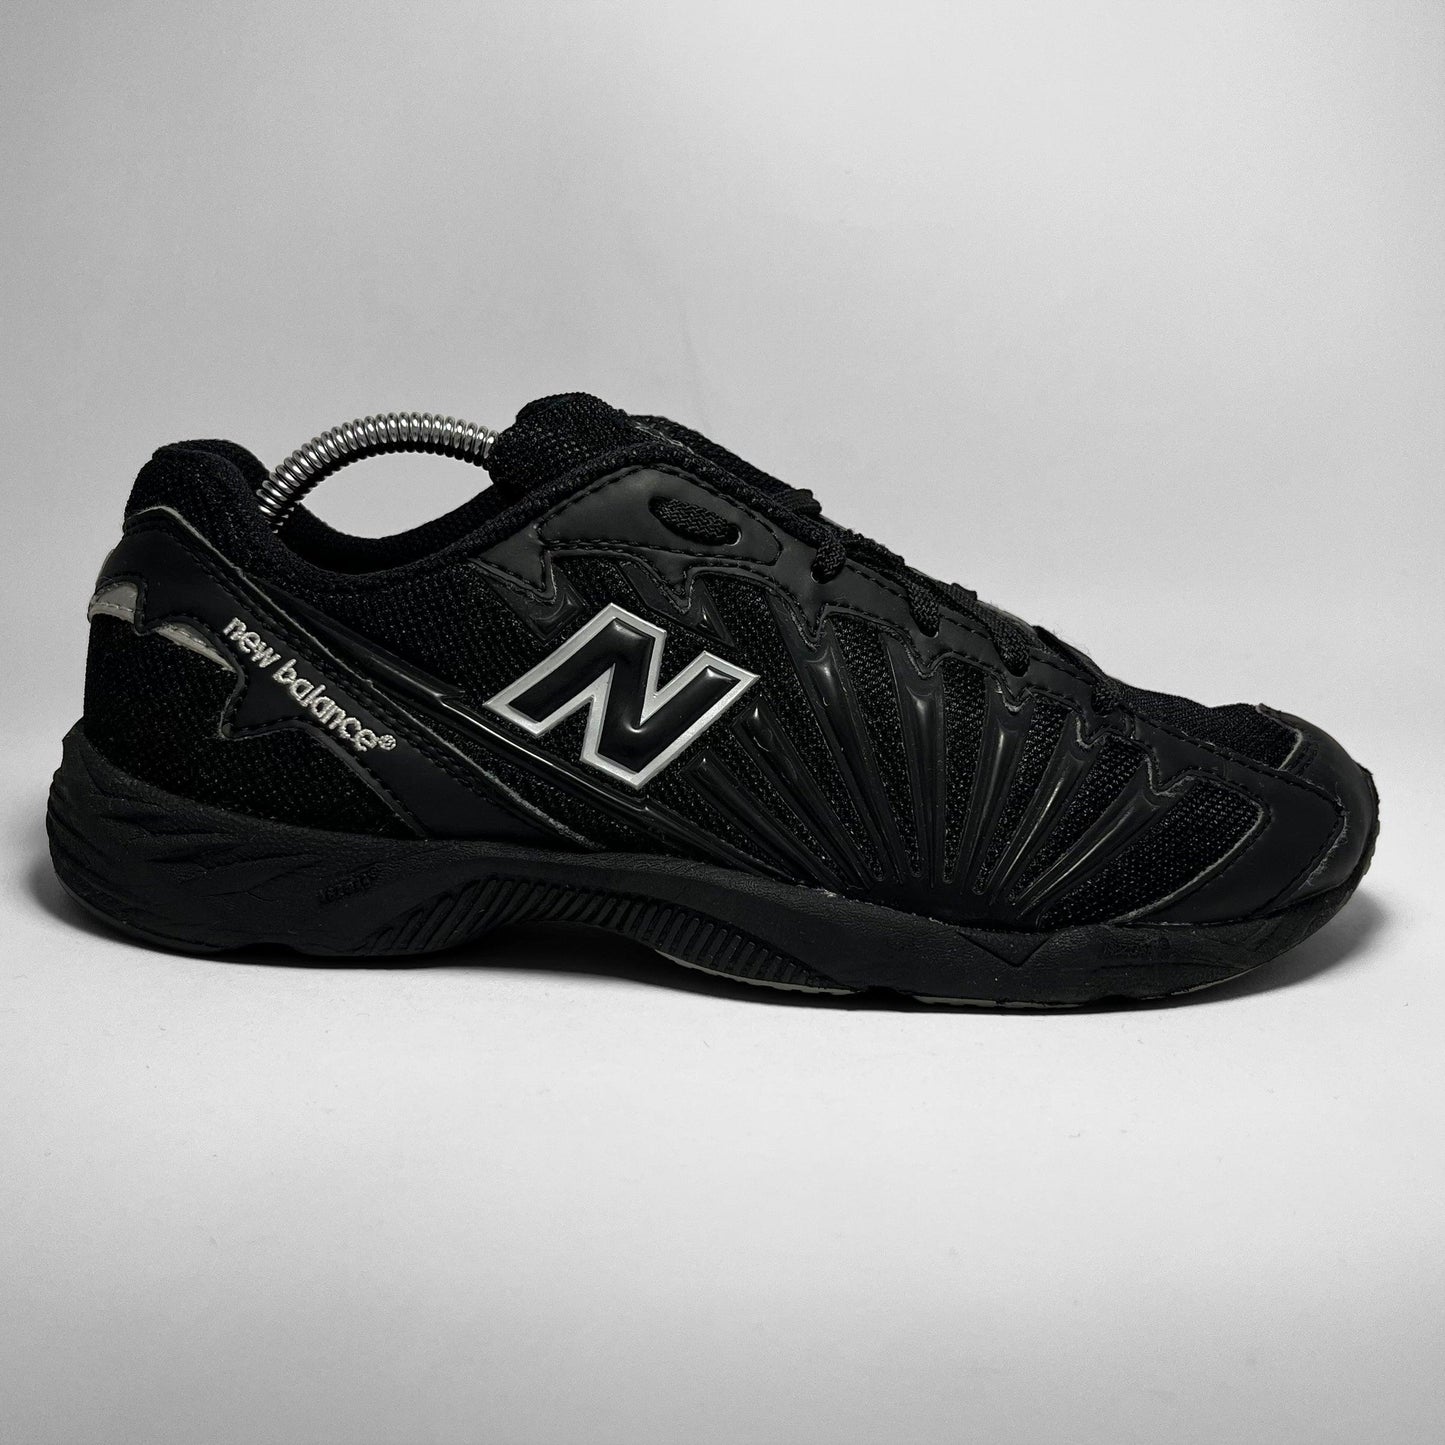 New Balance 203 (2000s) - Known Source